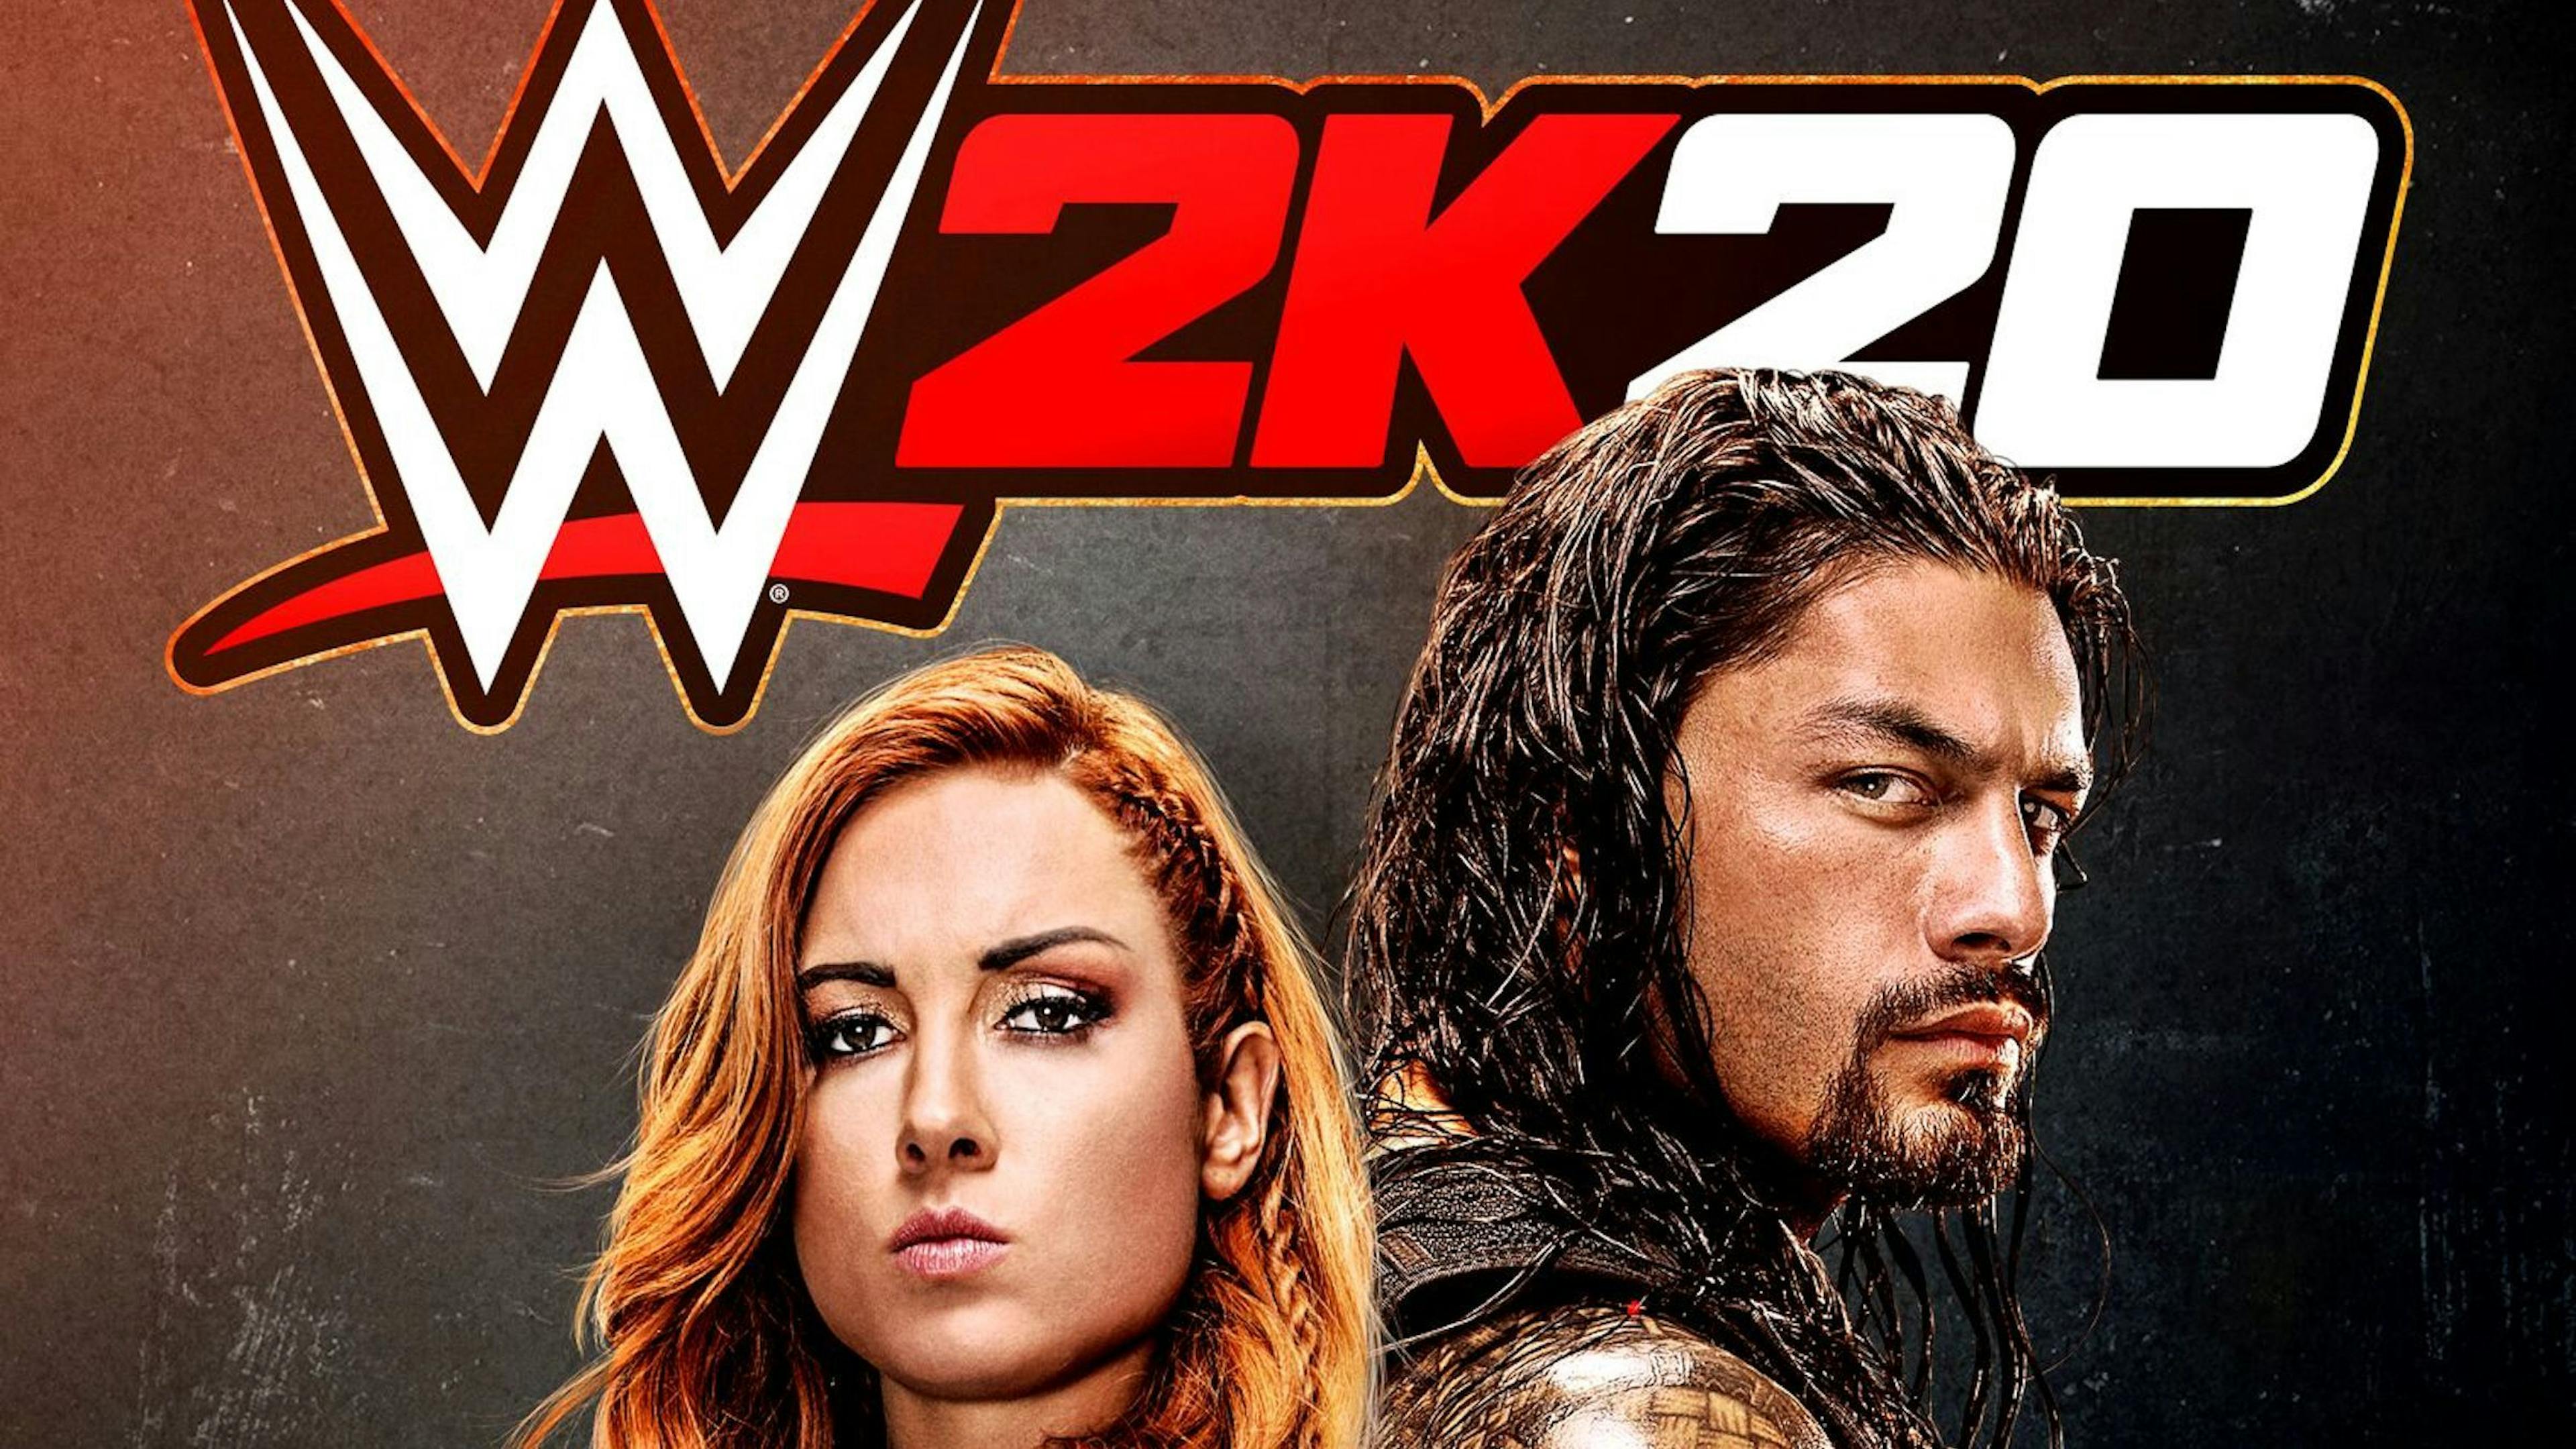 Mötley Crüe, The Misfits, And Bring Me The Horizon To Appear On WWE 2K20 Soundtrack